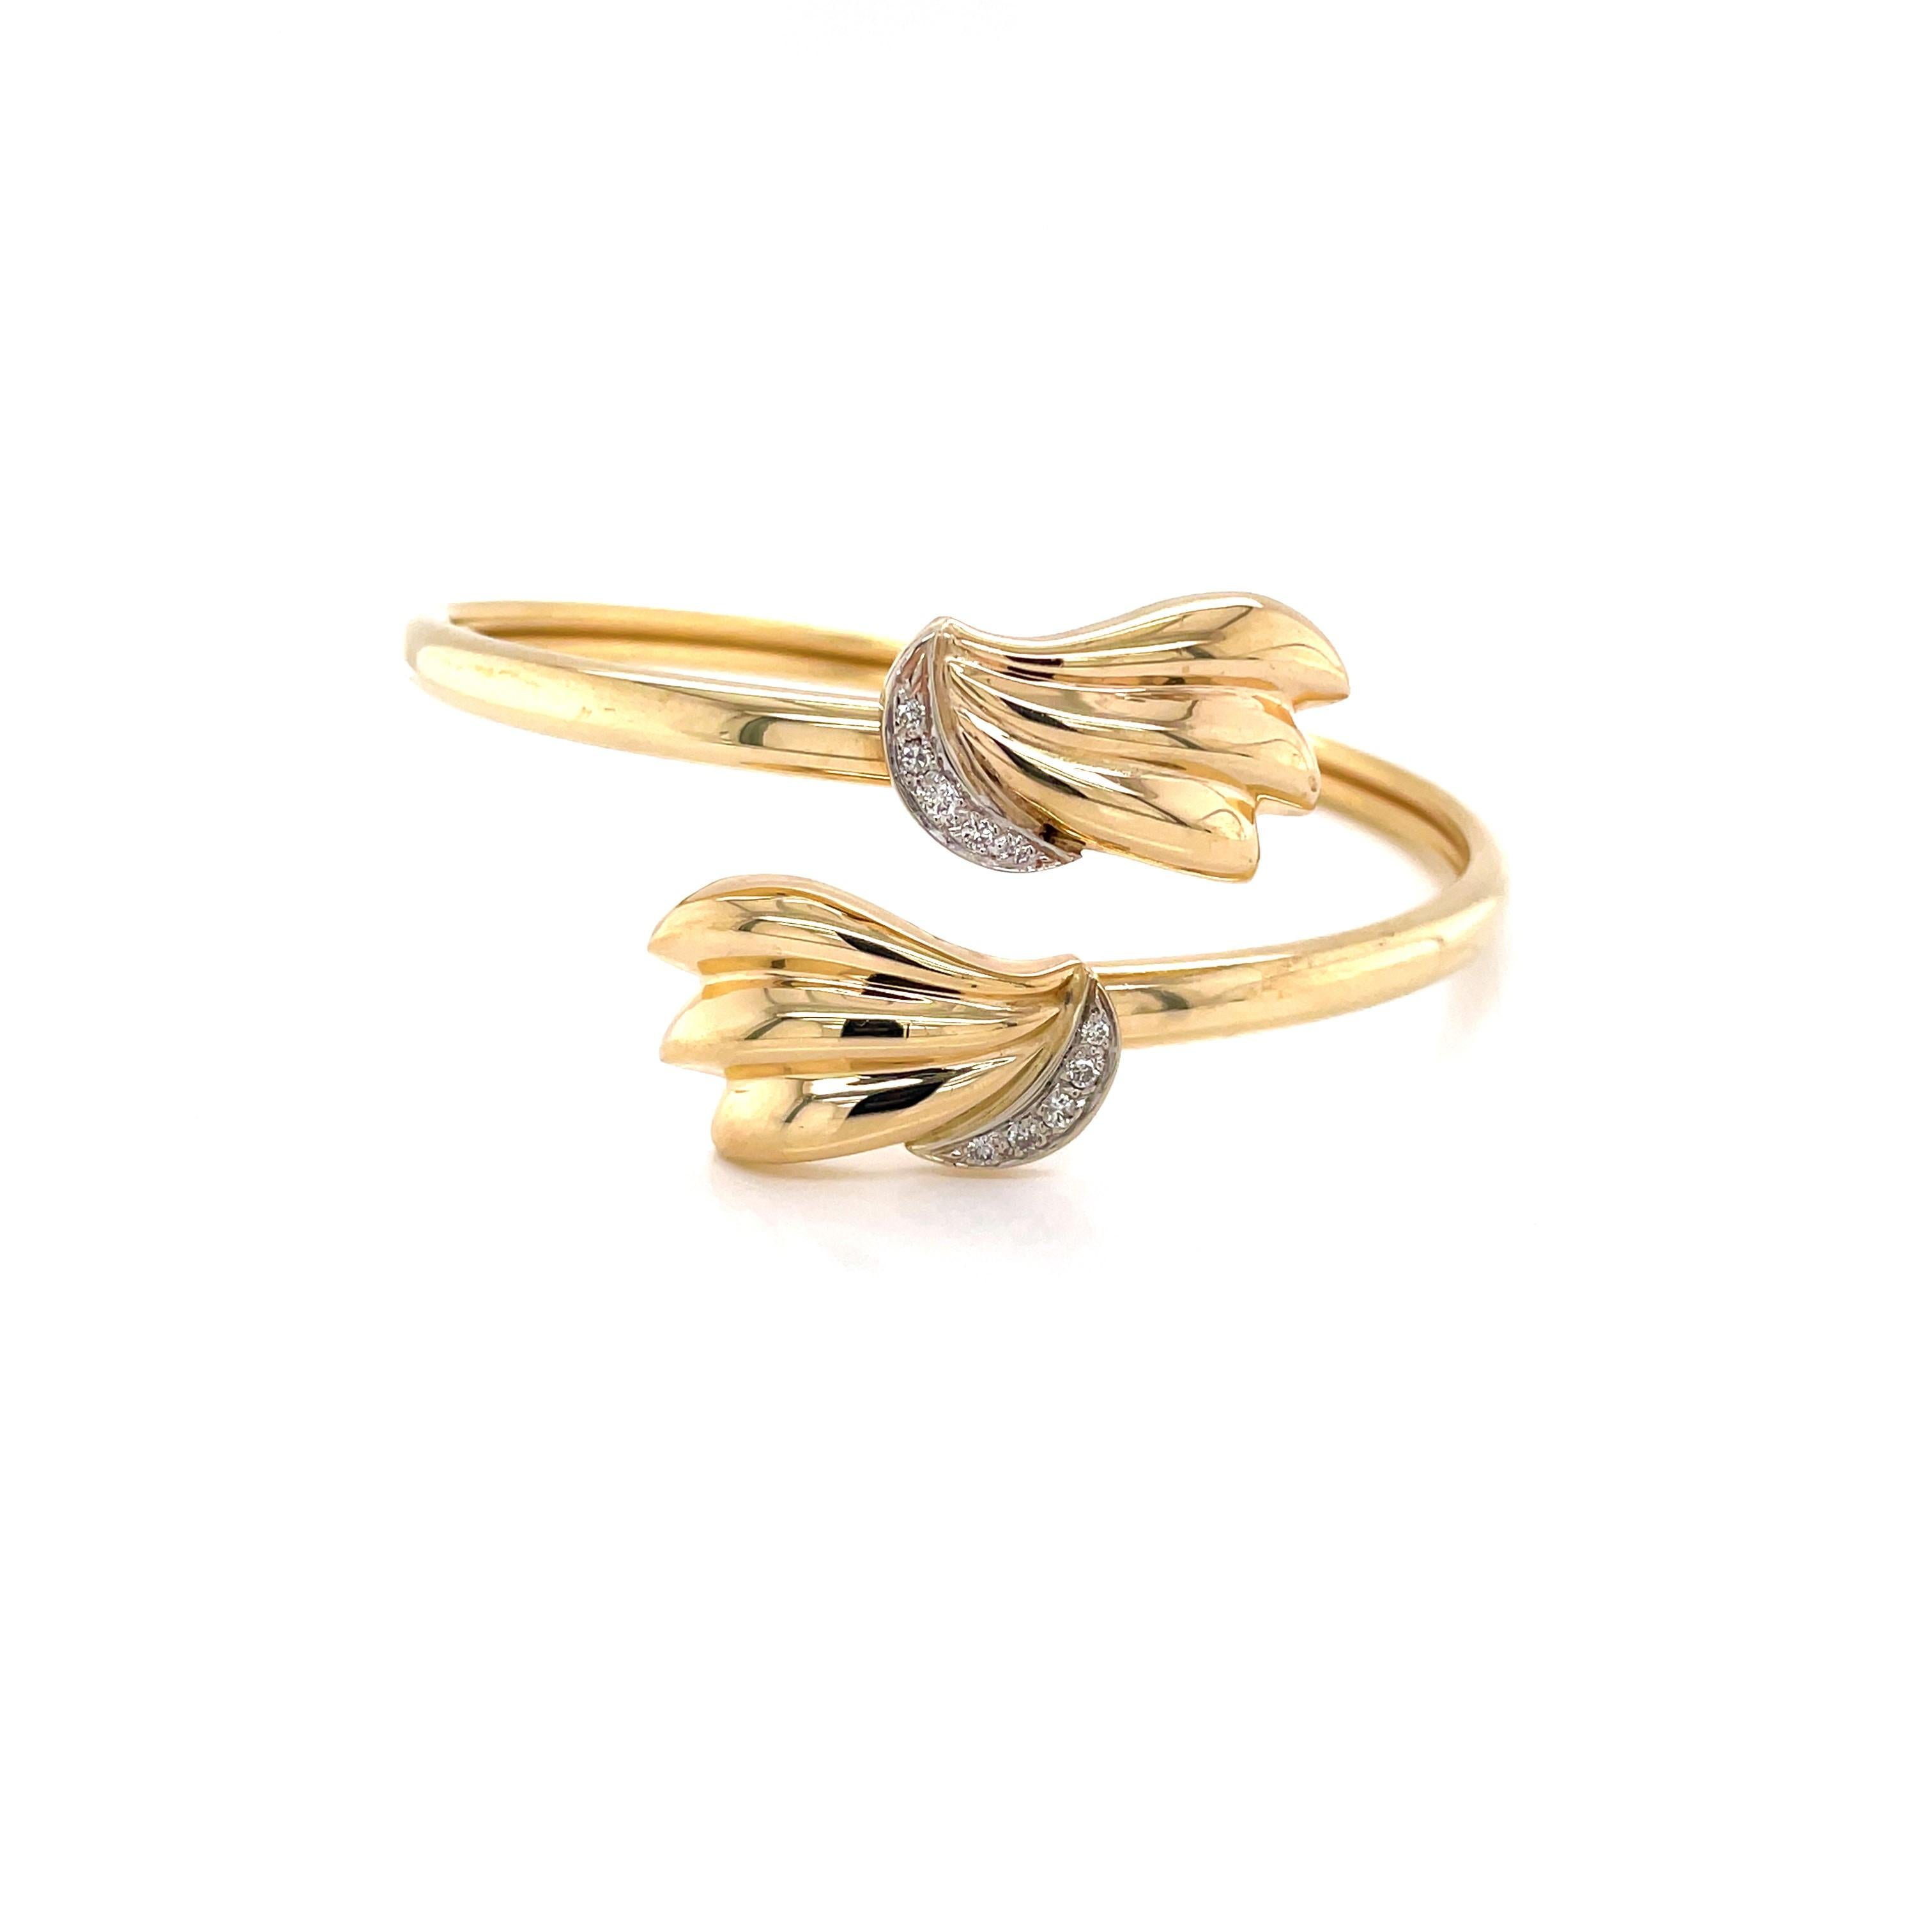 Wrap your wrist with a twist of gold and a little extra sparkle. Slender and flexible, measuring 2-3/8 inches in diameter and made of tubular construction, this 14 karat yellow gold bangle is light weight and comfortable to wear.  Flora inspired